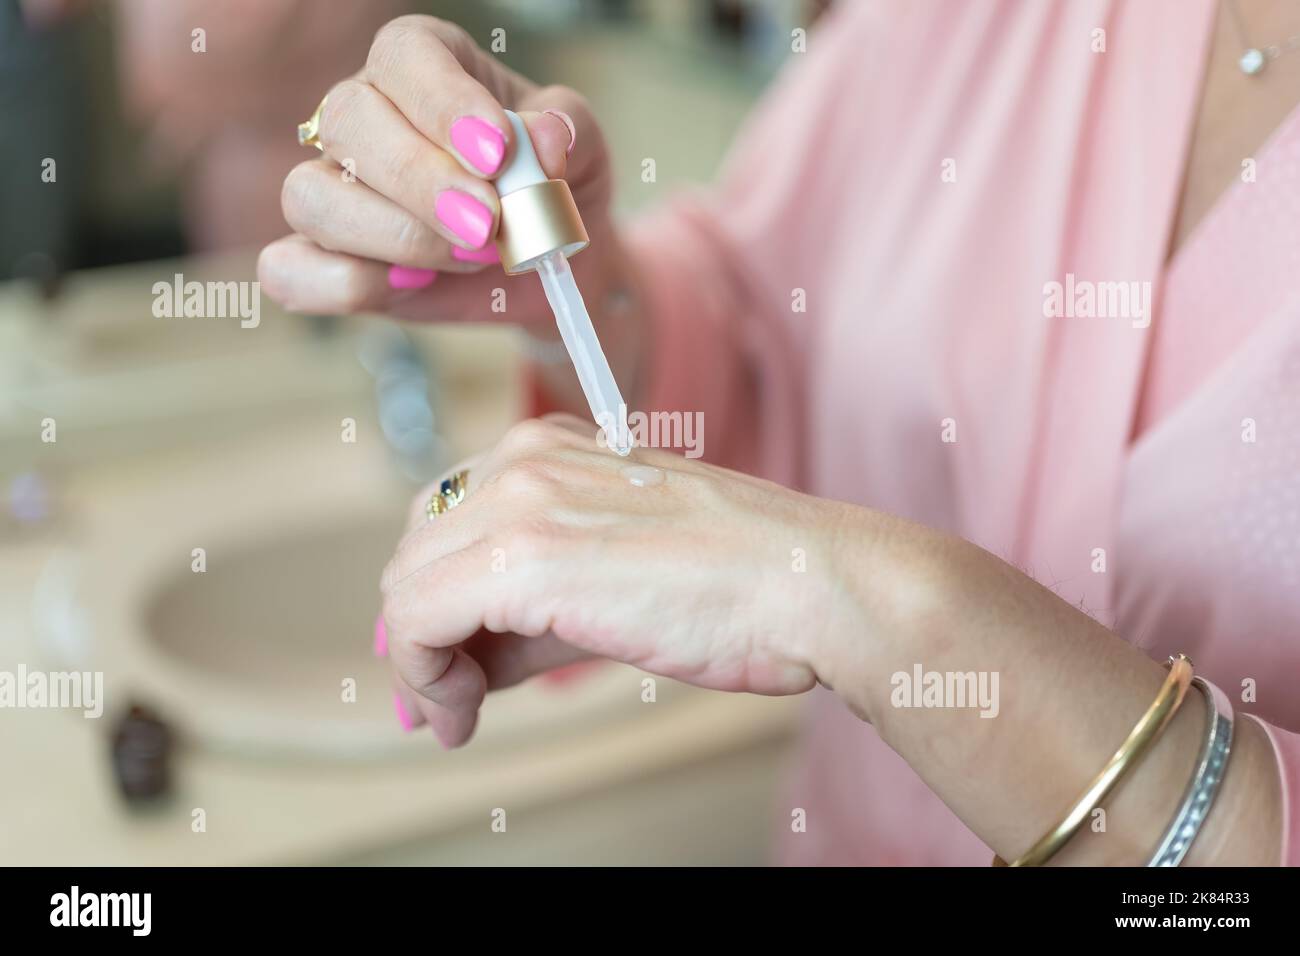 Senior woman applying skin care products in the form of serum for hydration and personal care. Stock Photo